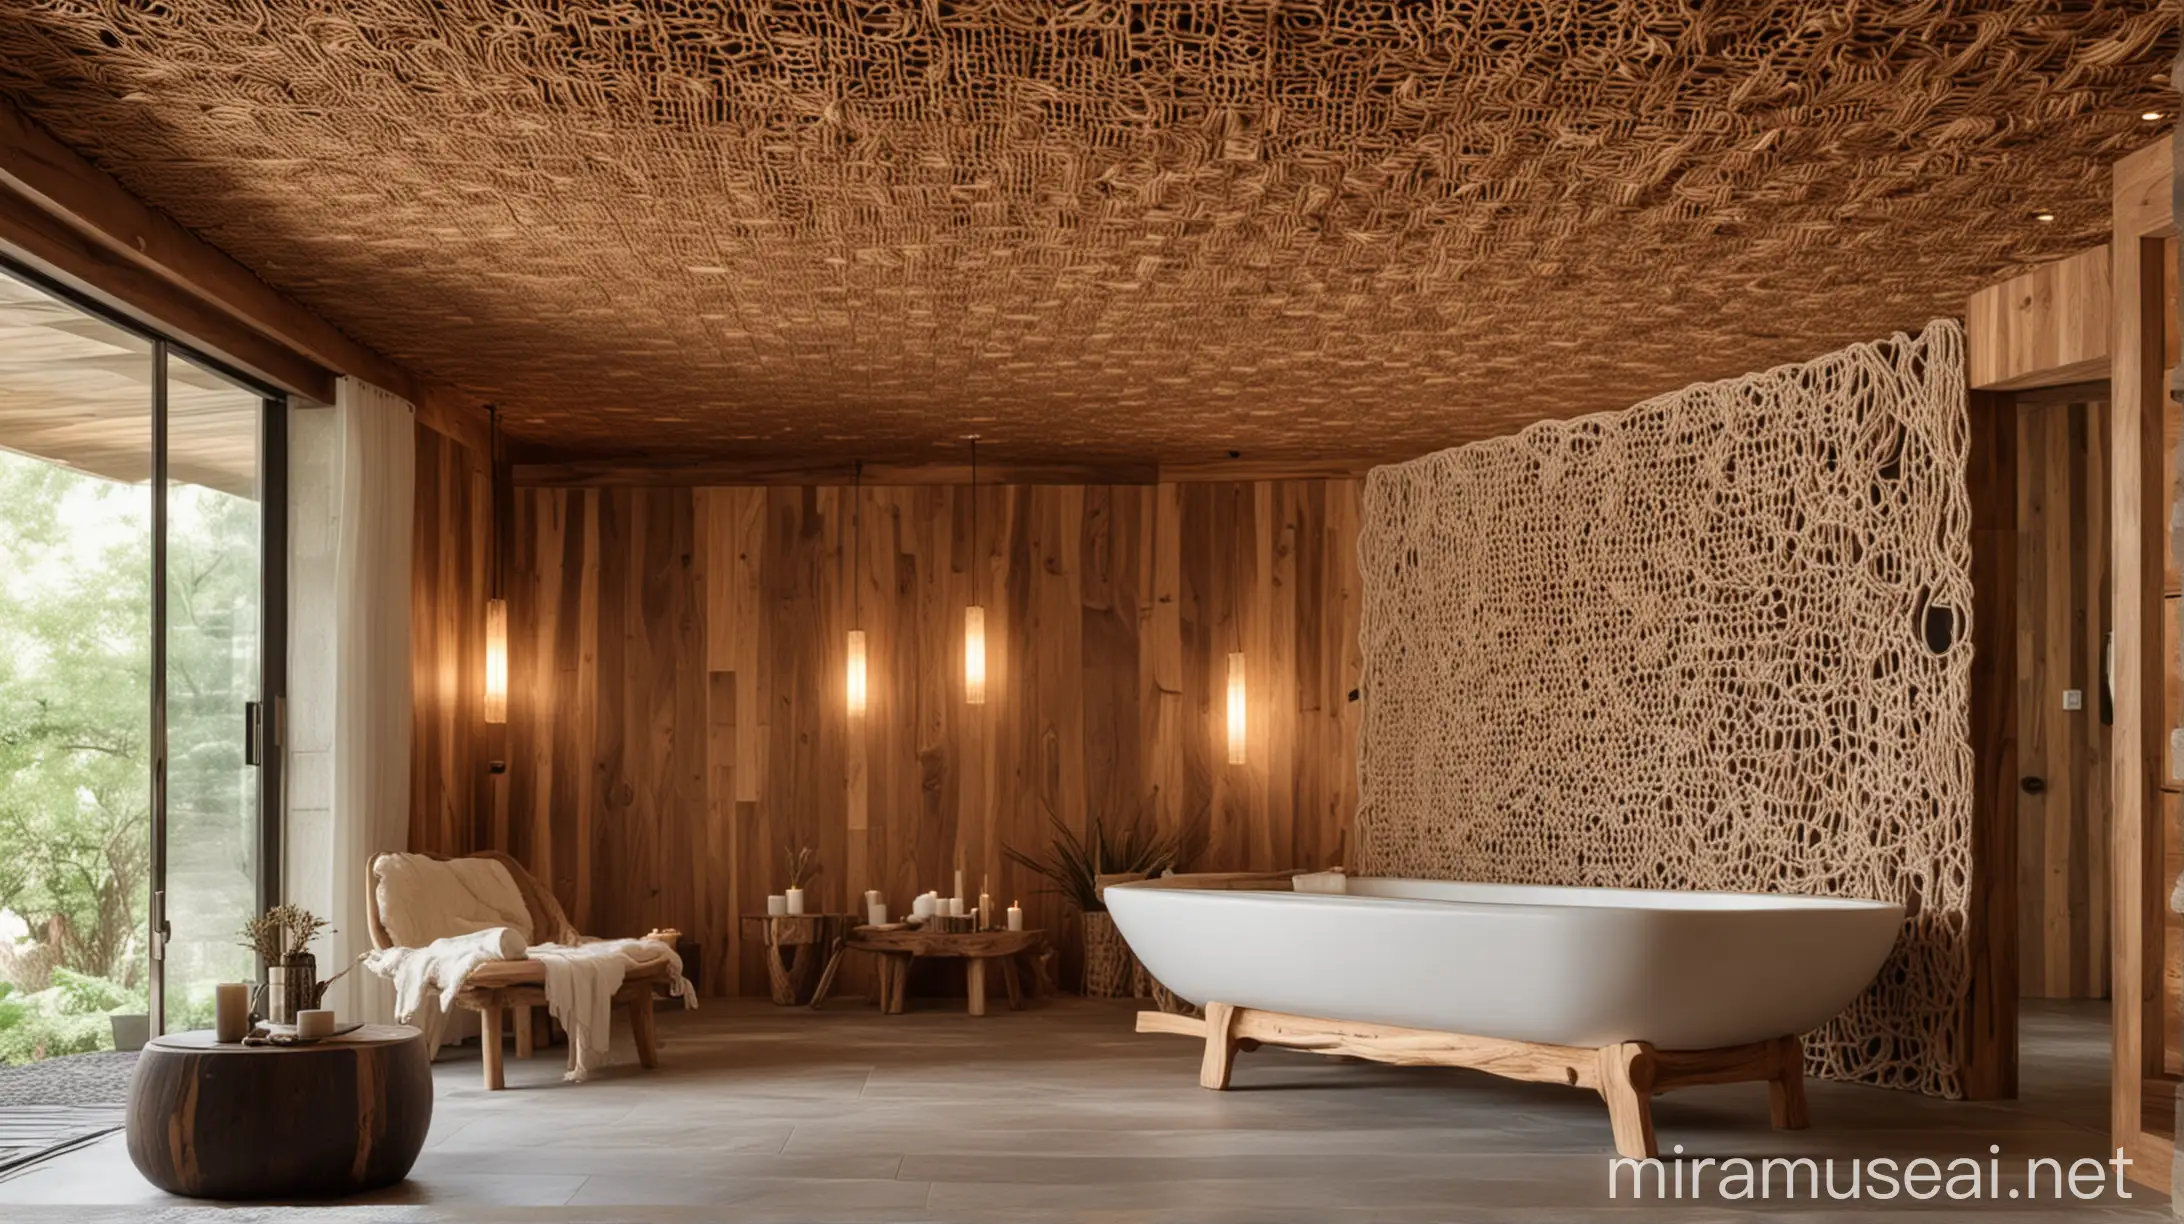 Modern Spa Interior with Handcrafted Macram Furniture and Wood Ceiling